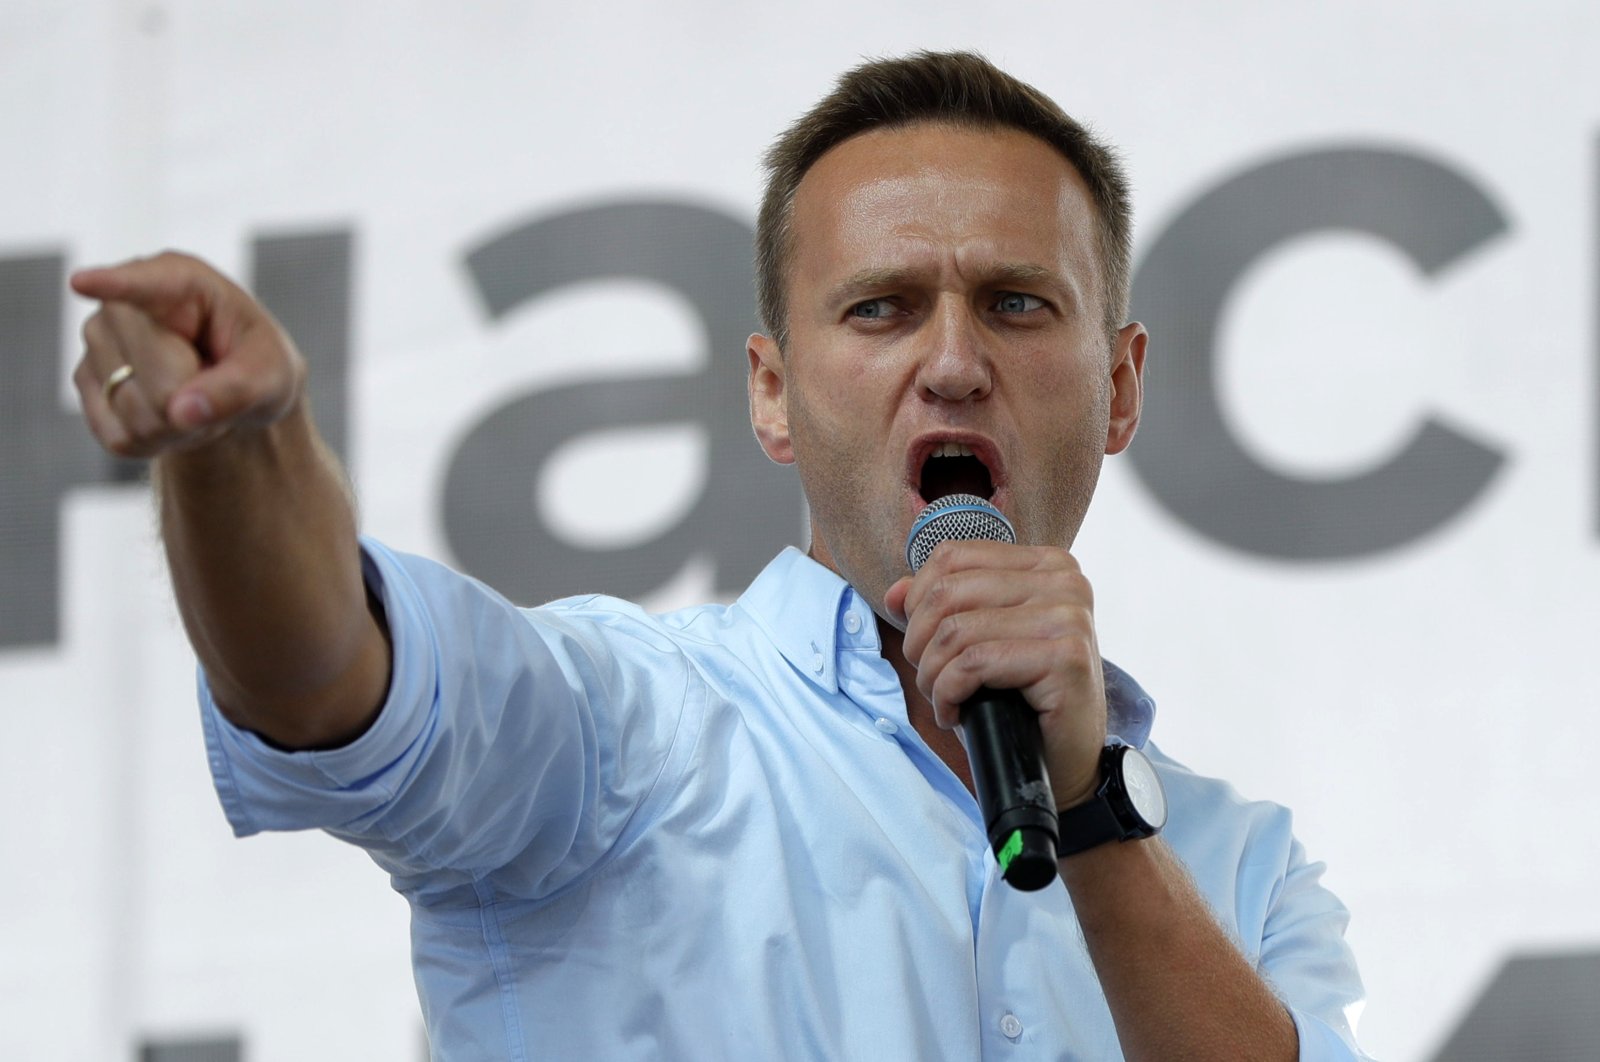 Russian opposition activist Alexei Navalny gestures while speaking to a crowd during a political protest in Moscow, Russia, July 20, 2019.  (AP Photo)